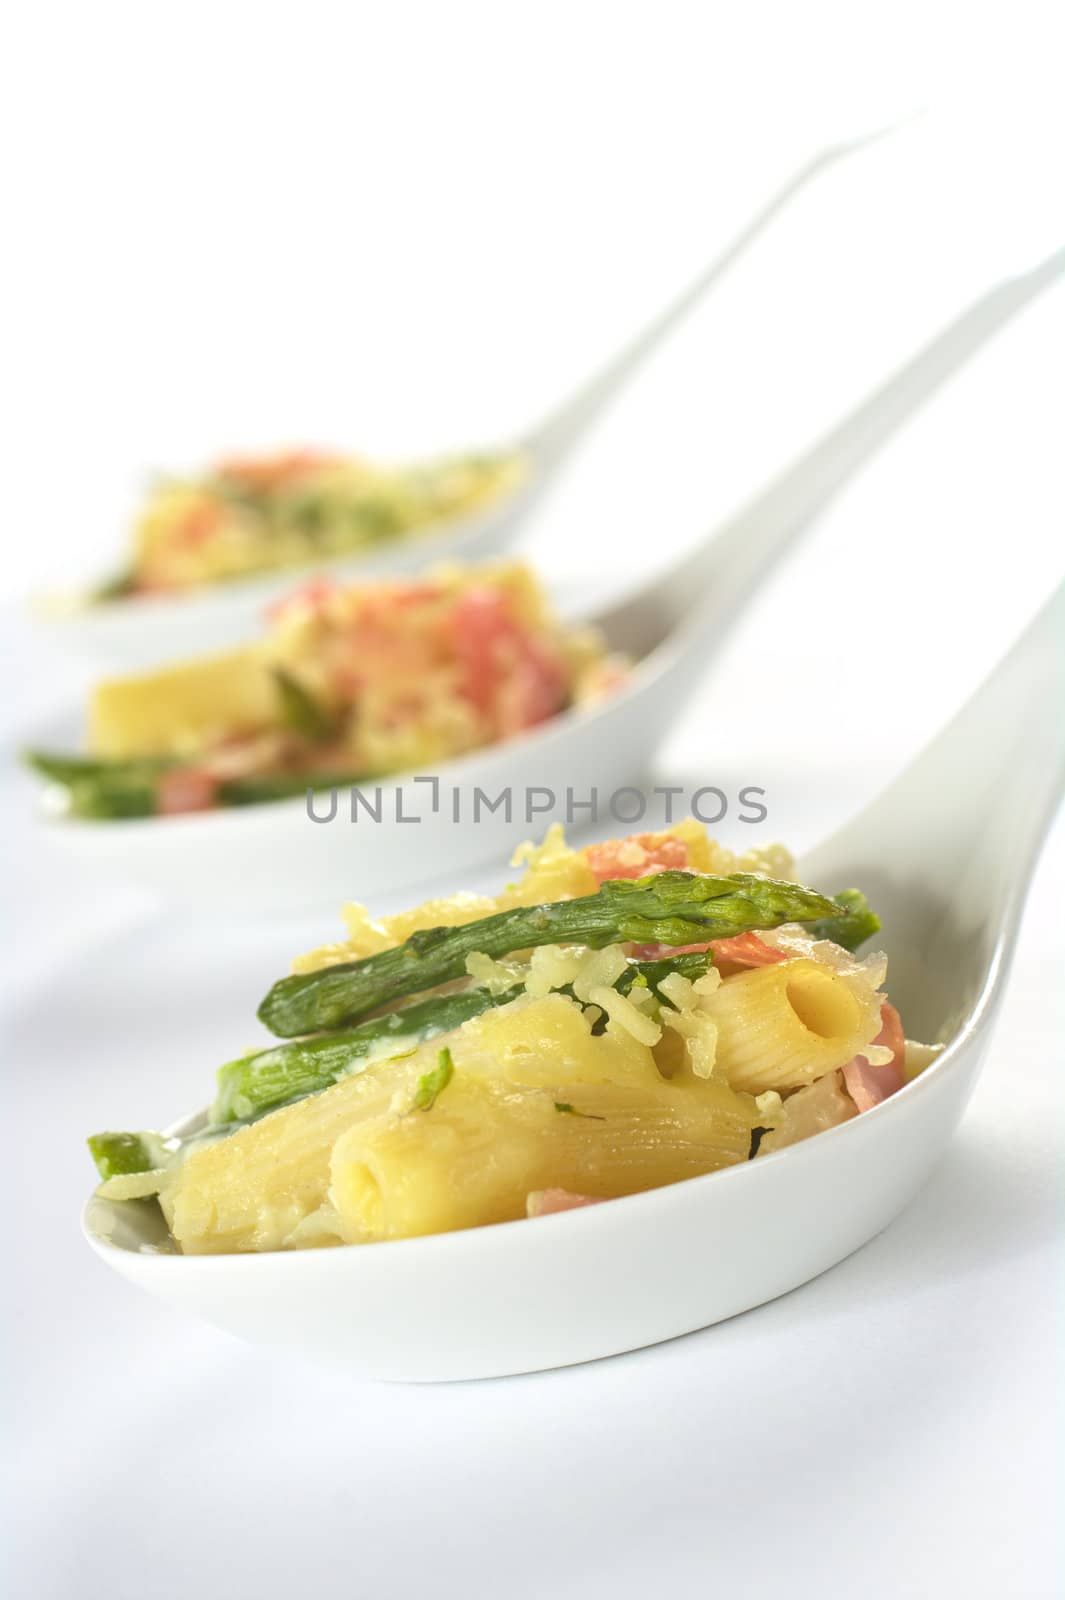 Green asparagus, ham and pasta casserole (Selective Focus, Focus on the asparagus head in the front)